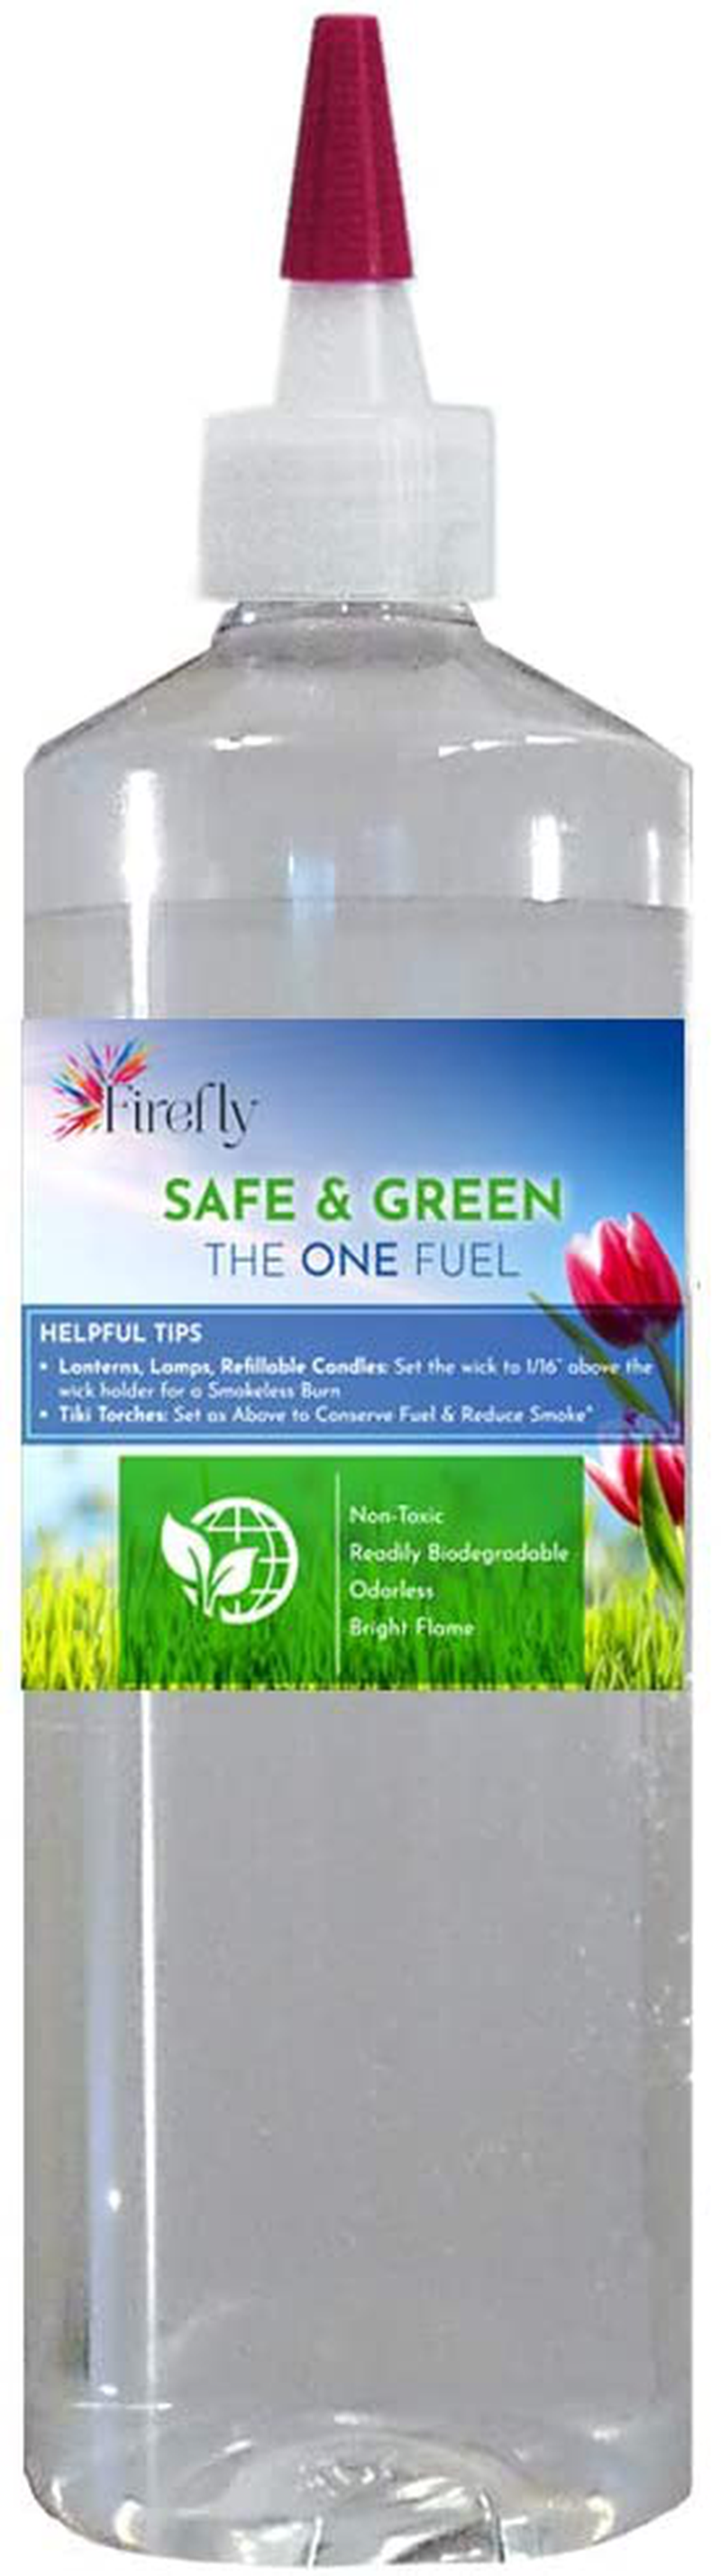 Firefly Kosher Safe and Green Eco-Friendly Lamp Oil - Non Toxic - Biodegradable - Virtually Odorless - Paraffin Alternative - Indoor Outdoor Use - Lamps, Lanterns, Candles, Patio Tiki Torches - 16 Oz Home & Garden > Lighting Accessories > Oil Lamp Fuel Firefly 32 Ounces  